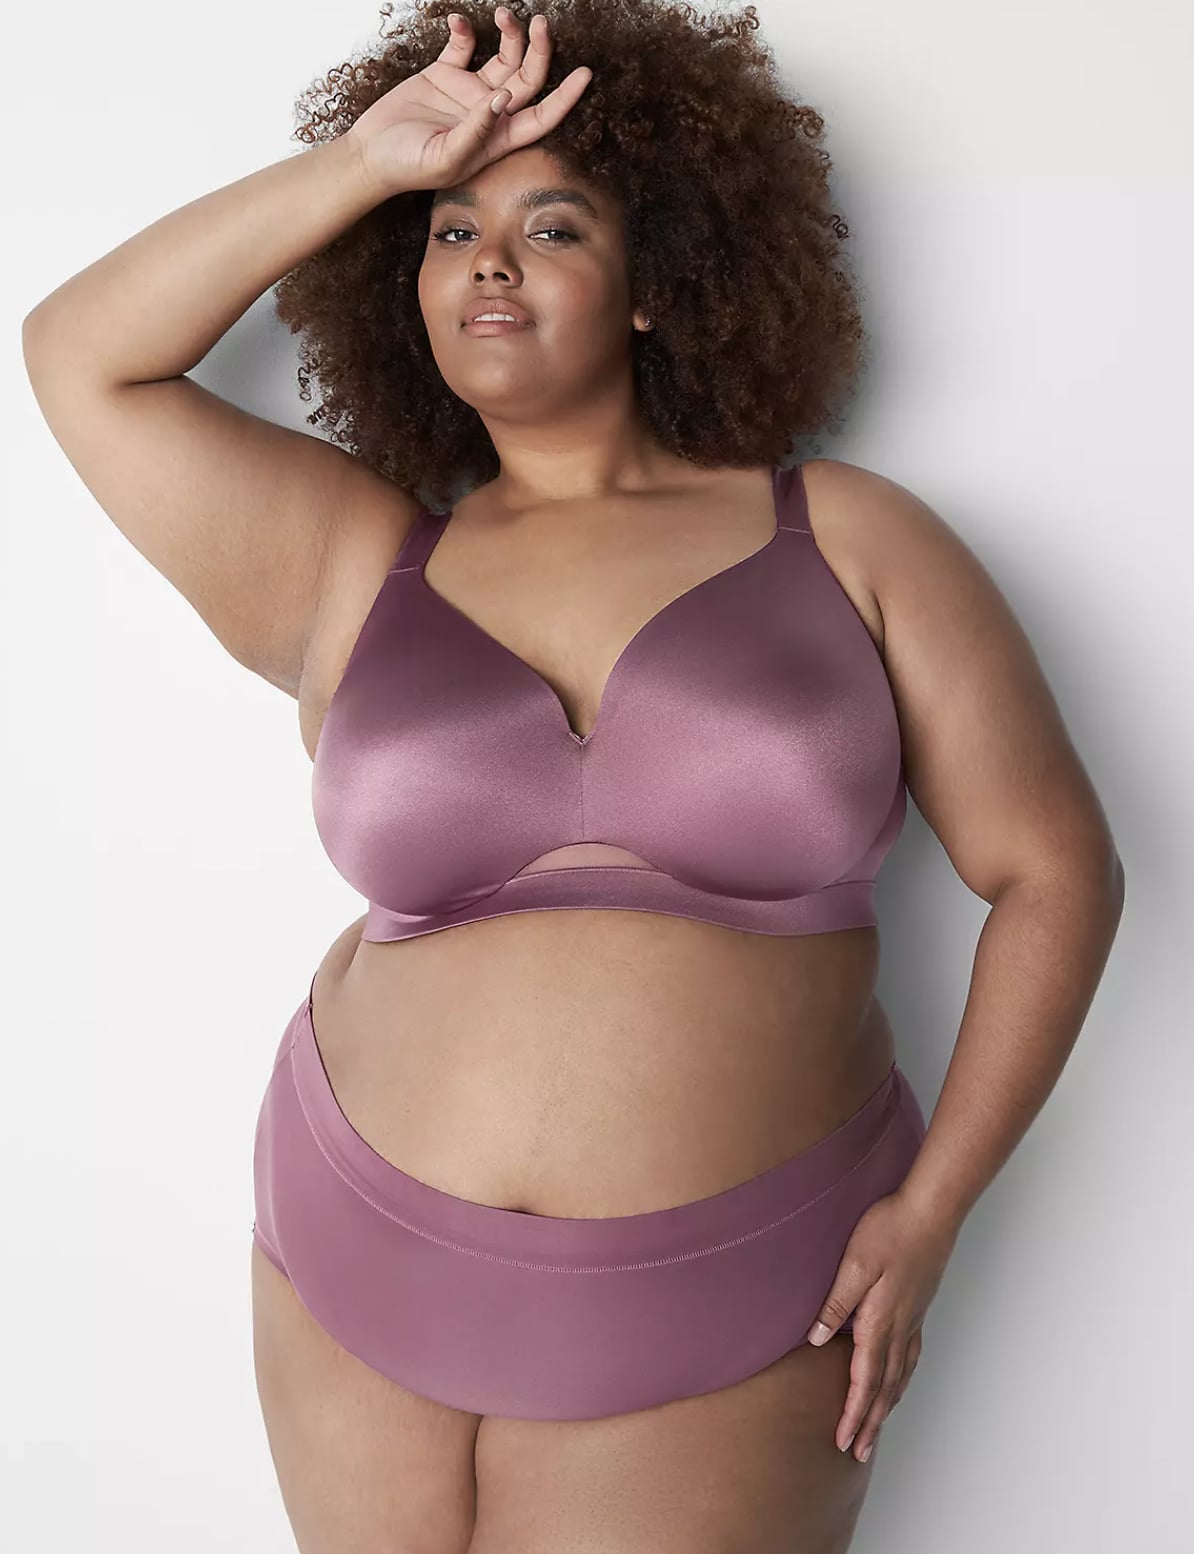 Bralettes Do Exist For Plus-Size & Busty Women